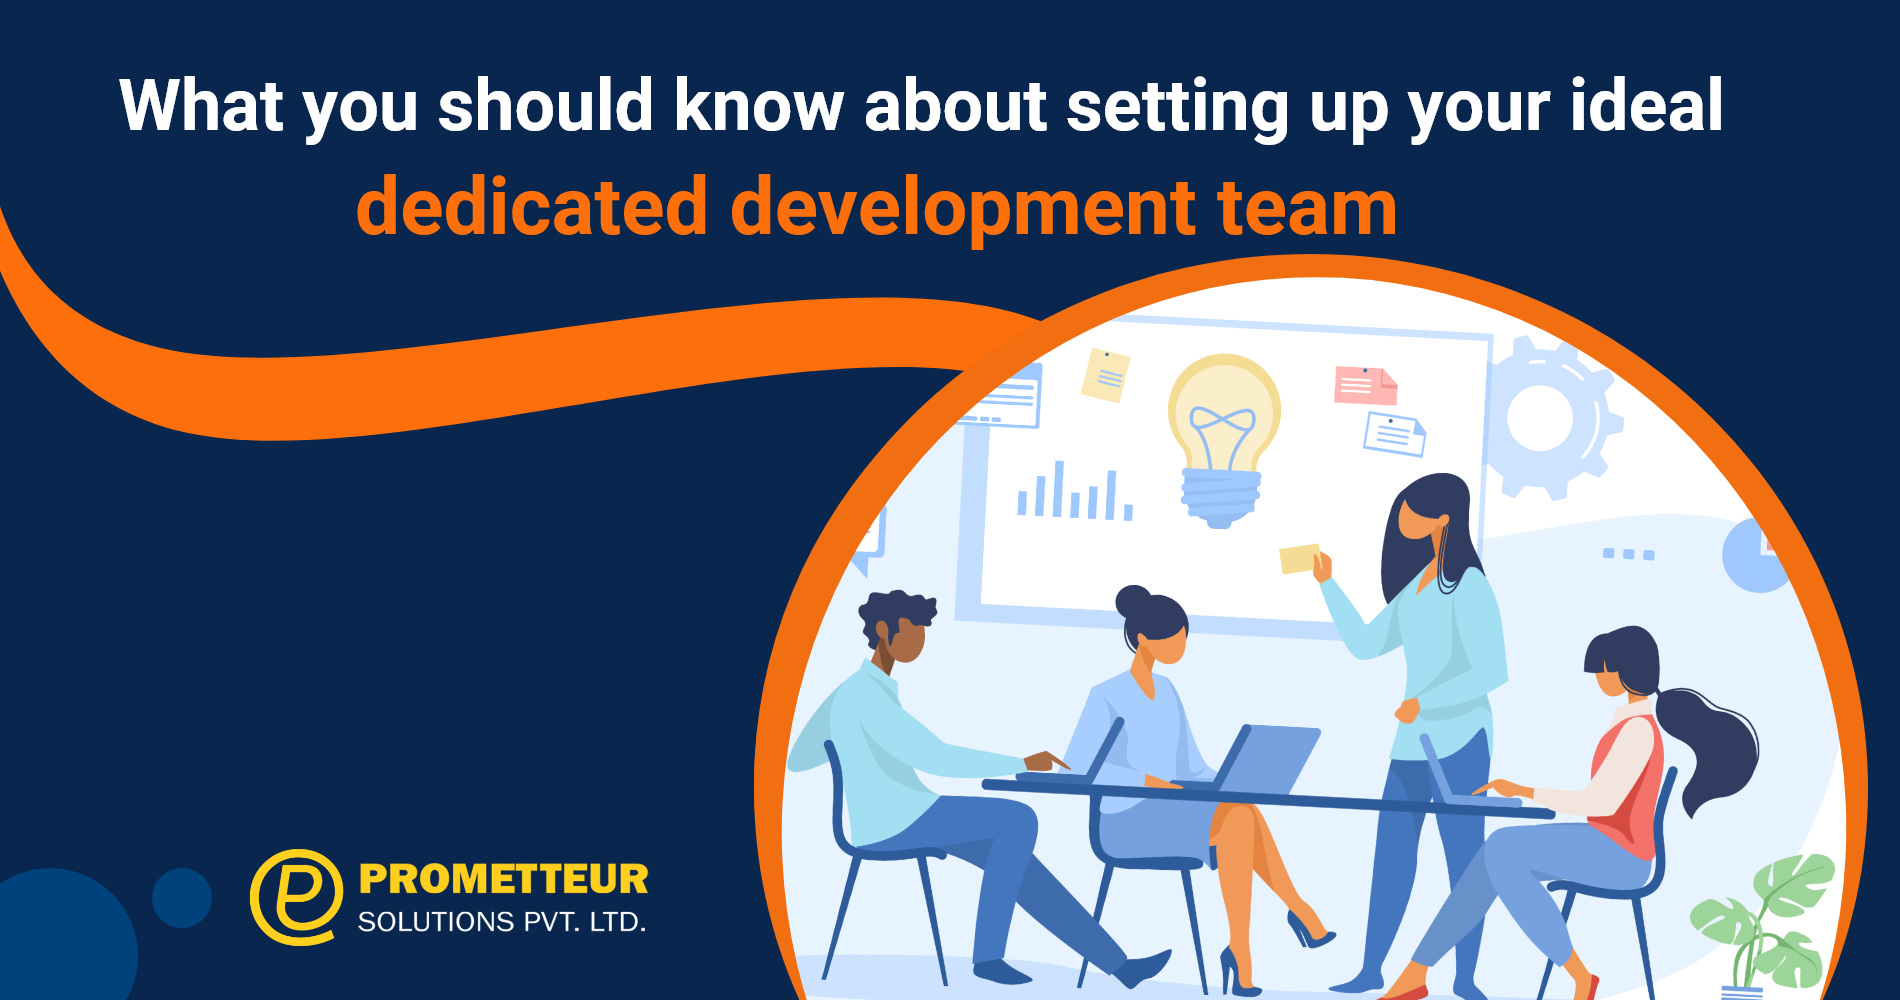 What you should know about setting up your ideal dedicated development team